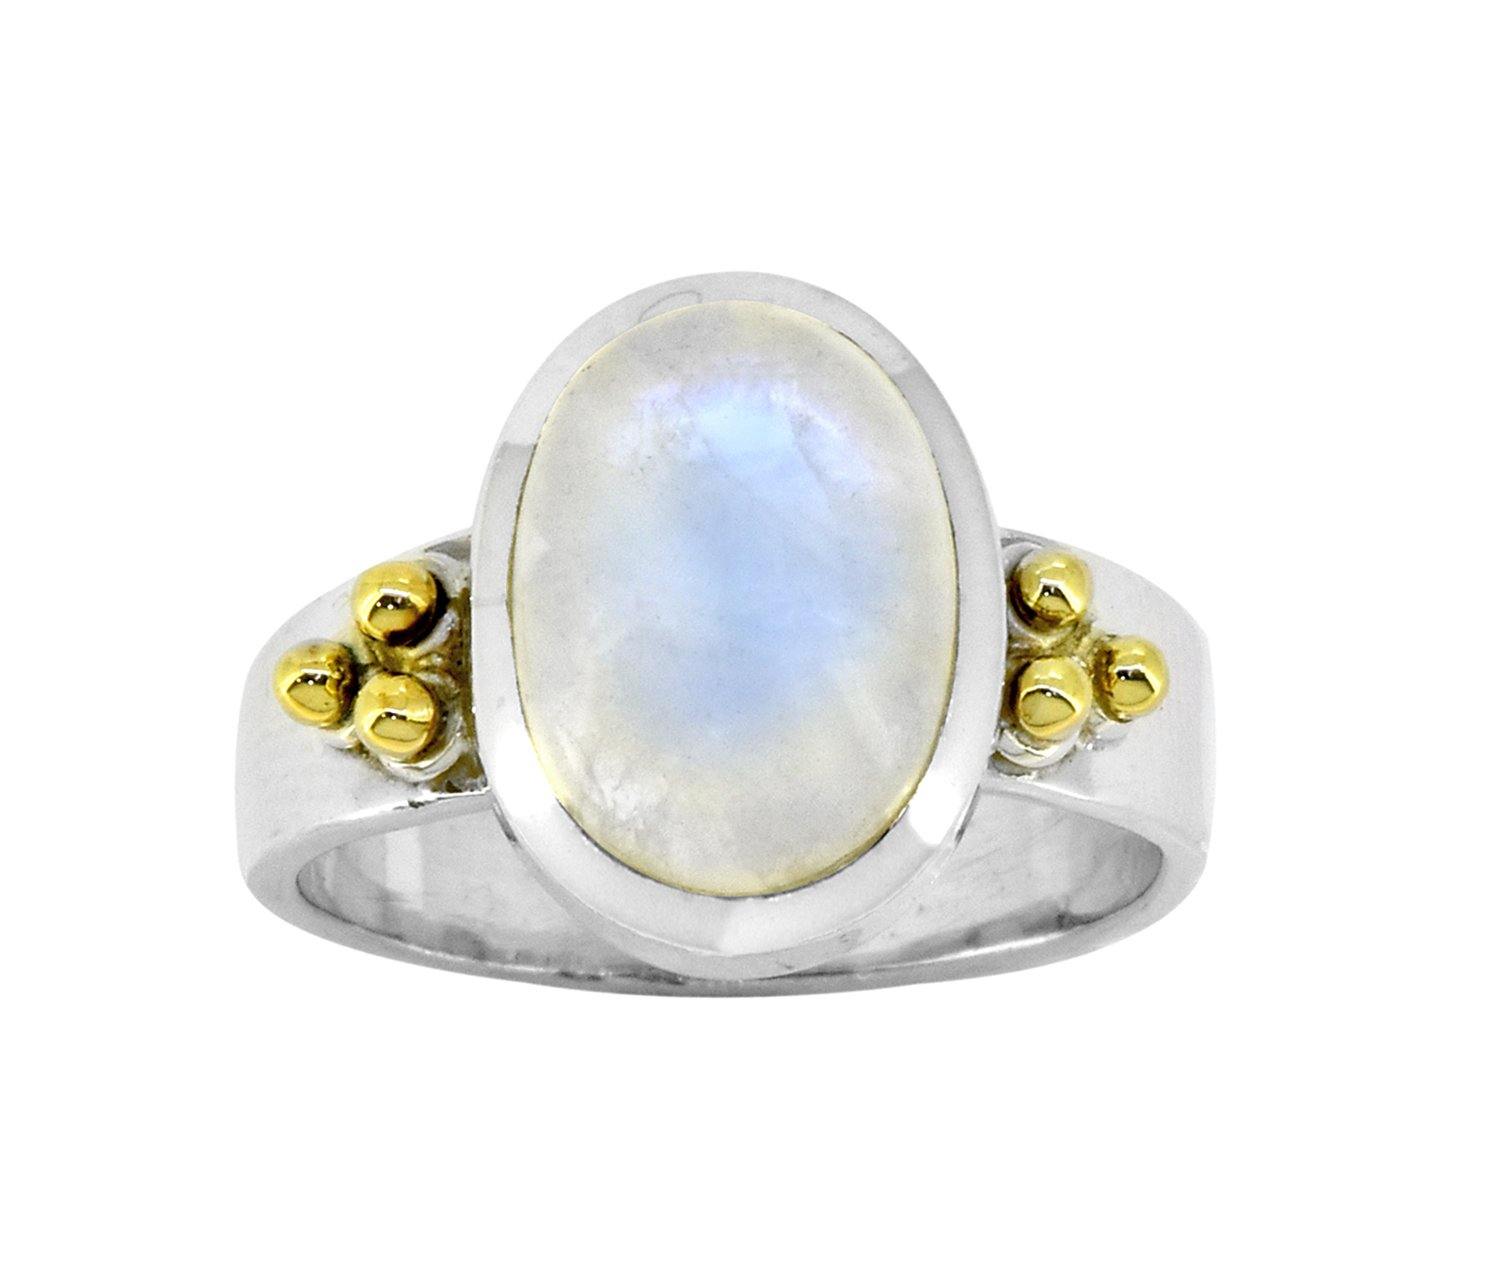 10x12 MM Moonstone Solitaire Ring 925 Sterling Silver With Brass Accents - YoTreasure